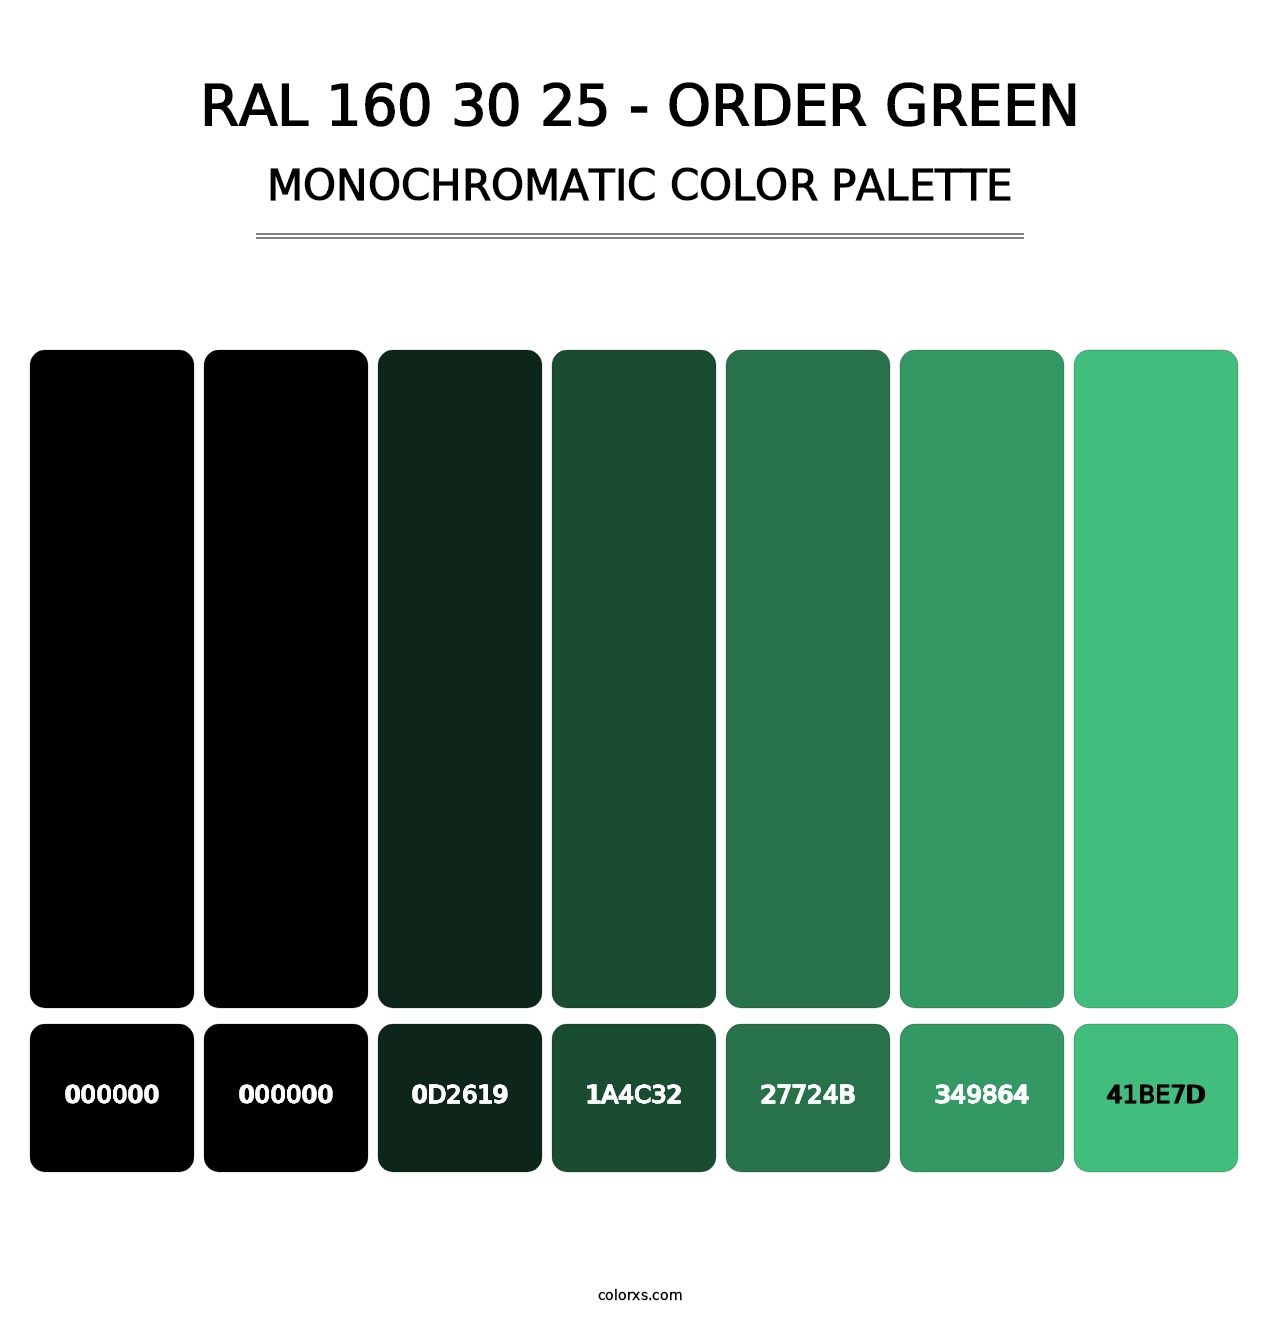 RAL 160 30 25 - Order Green - Monochromatic Color Palette